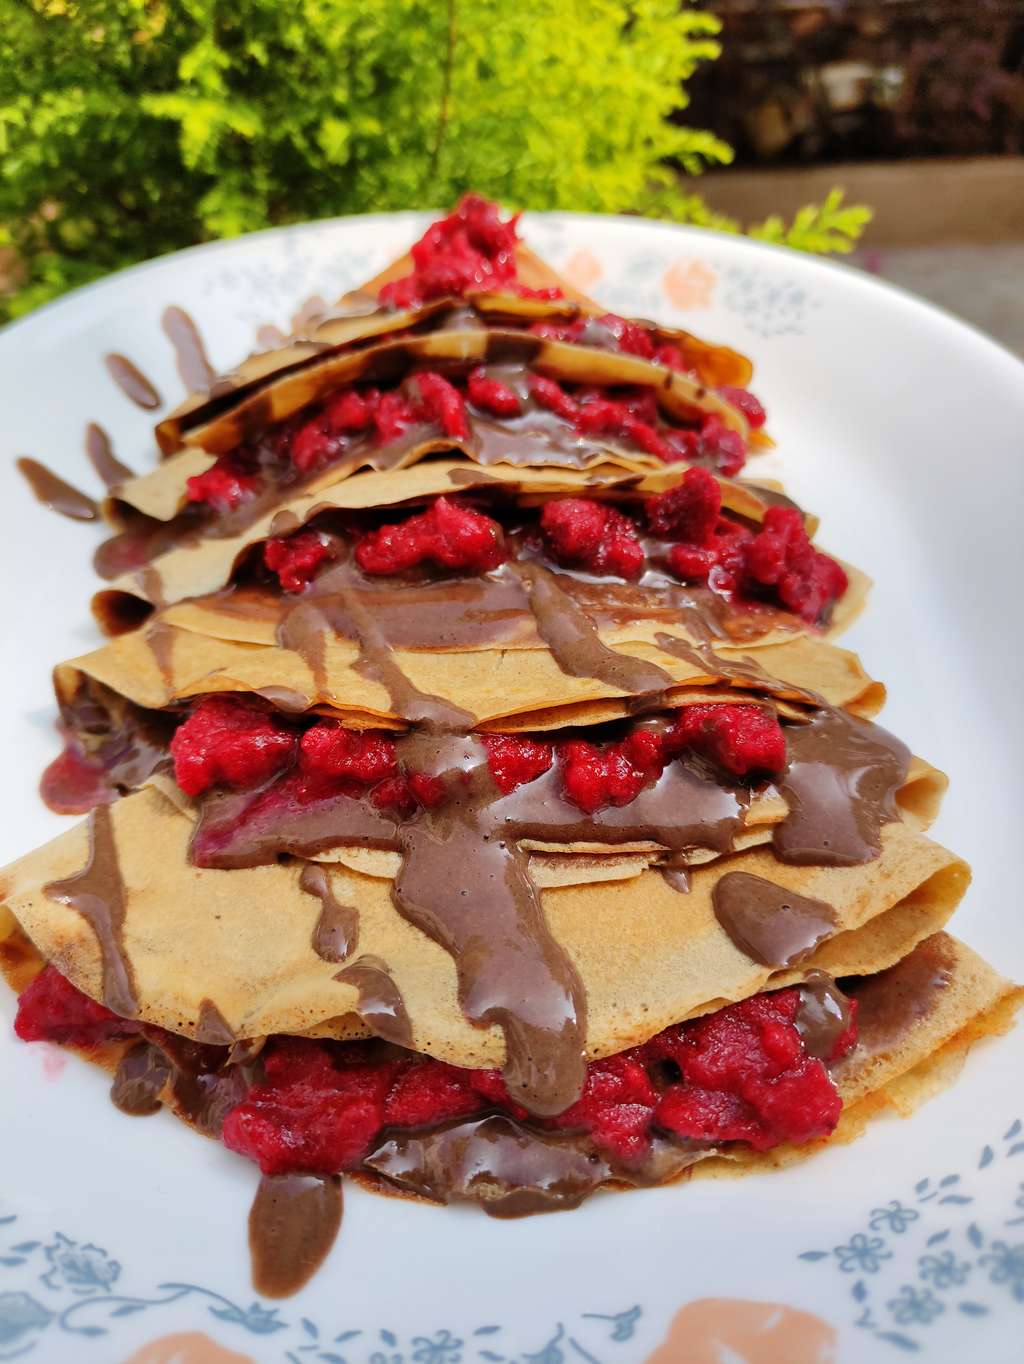 Healthy crepes with healthy chocolate frosting!